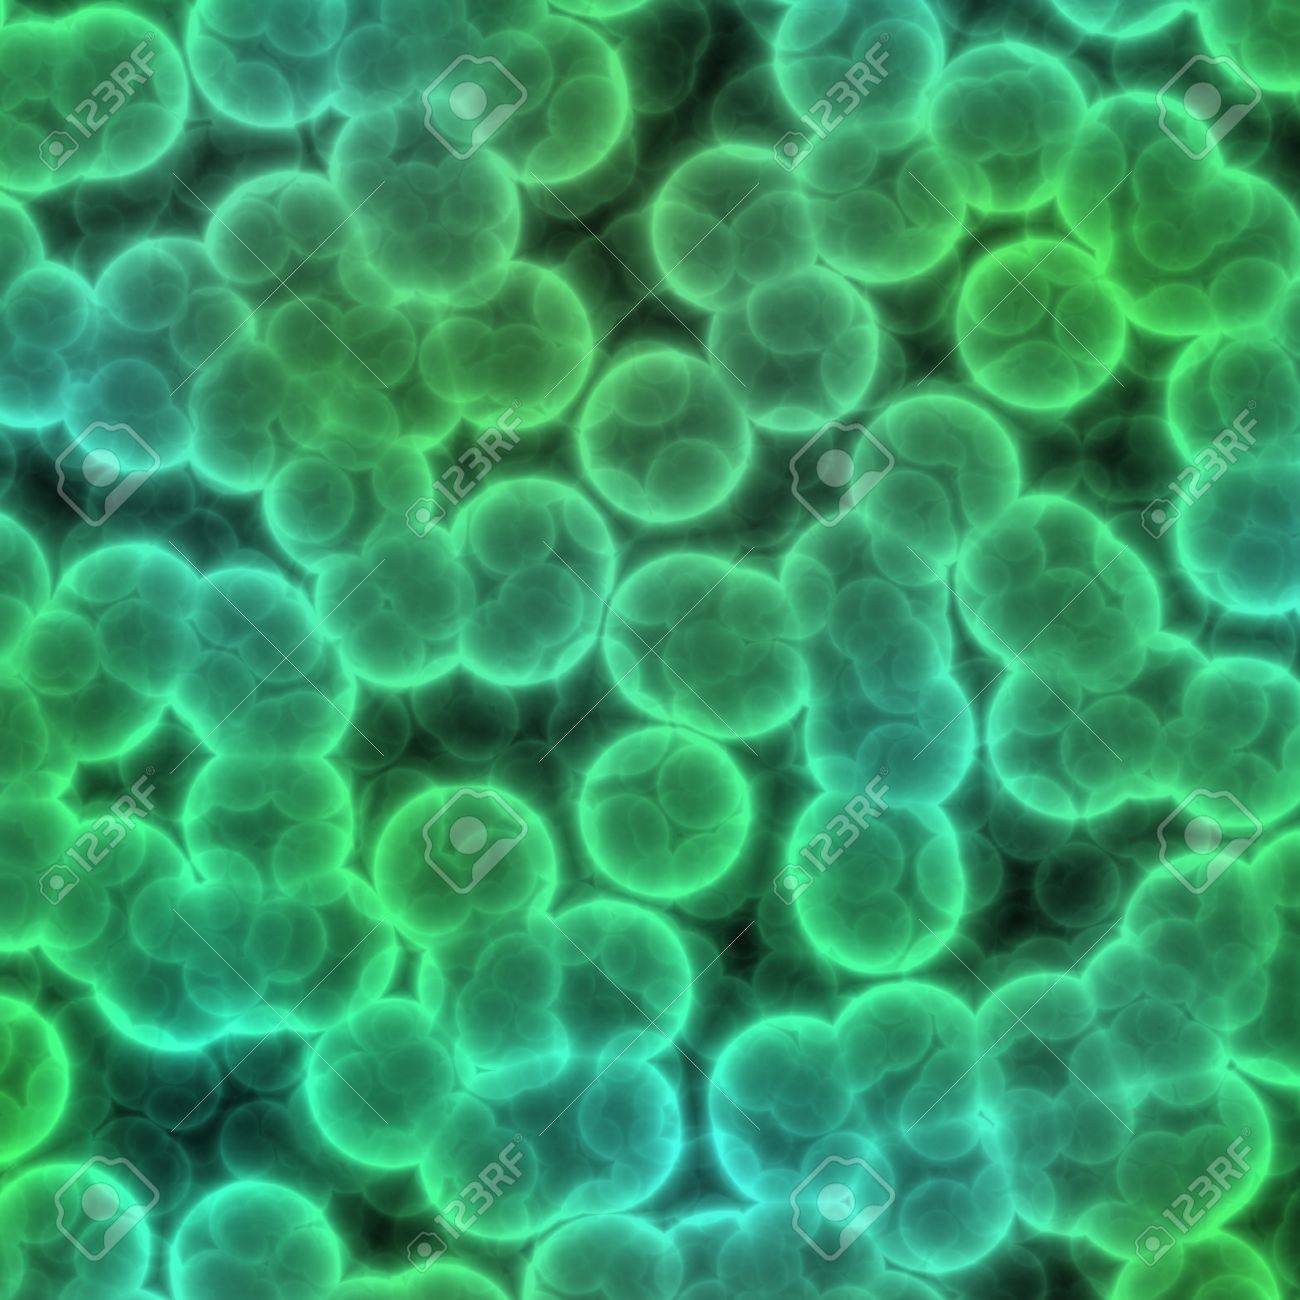 Abstract Bacteria Or Virus Cells Seamless Generated Texture